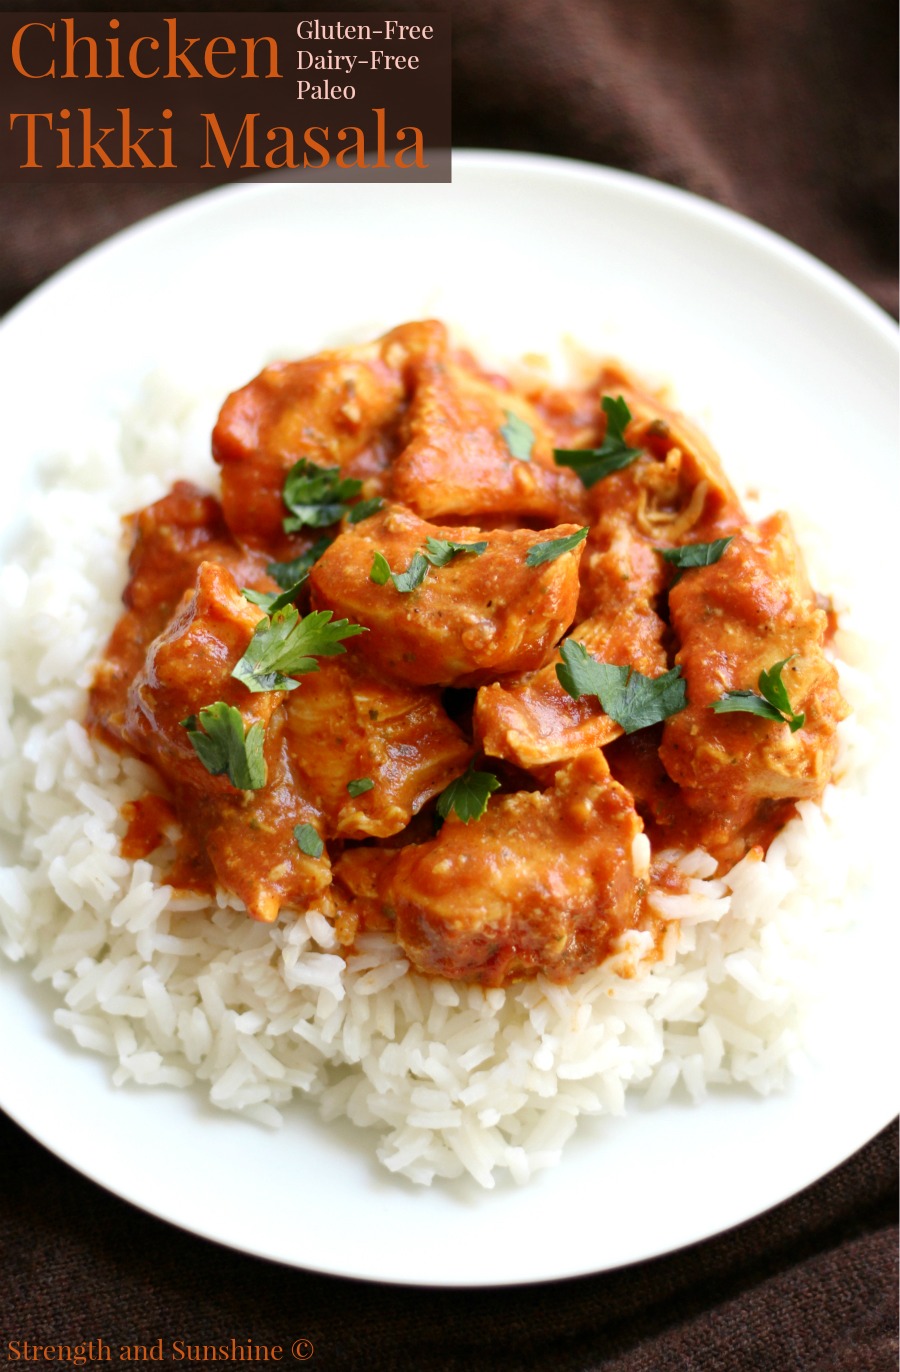 Chicken Tikki Masala (Gluten-Free, Dairy-Free, Paleo) | Strength and Sunshine @RebeccaGF666 Chicken Tikki Masala is a classic Indian dish now with a gluten-free, dairy-free, paleo, and allergy-friendly recipe! With a creamy tomato and coconut yogurt sauce, this comforting dish will make a great healthy weeknight dinner that packs in the flavor!